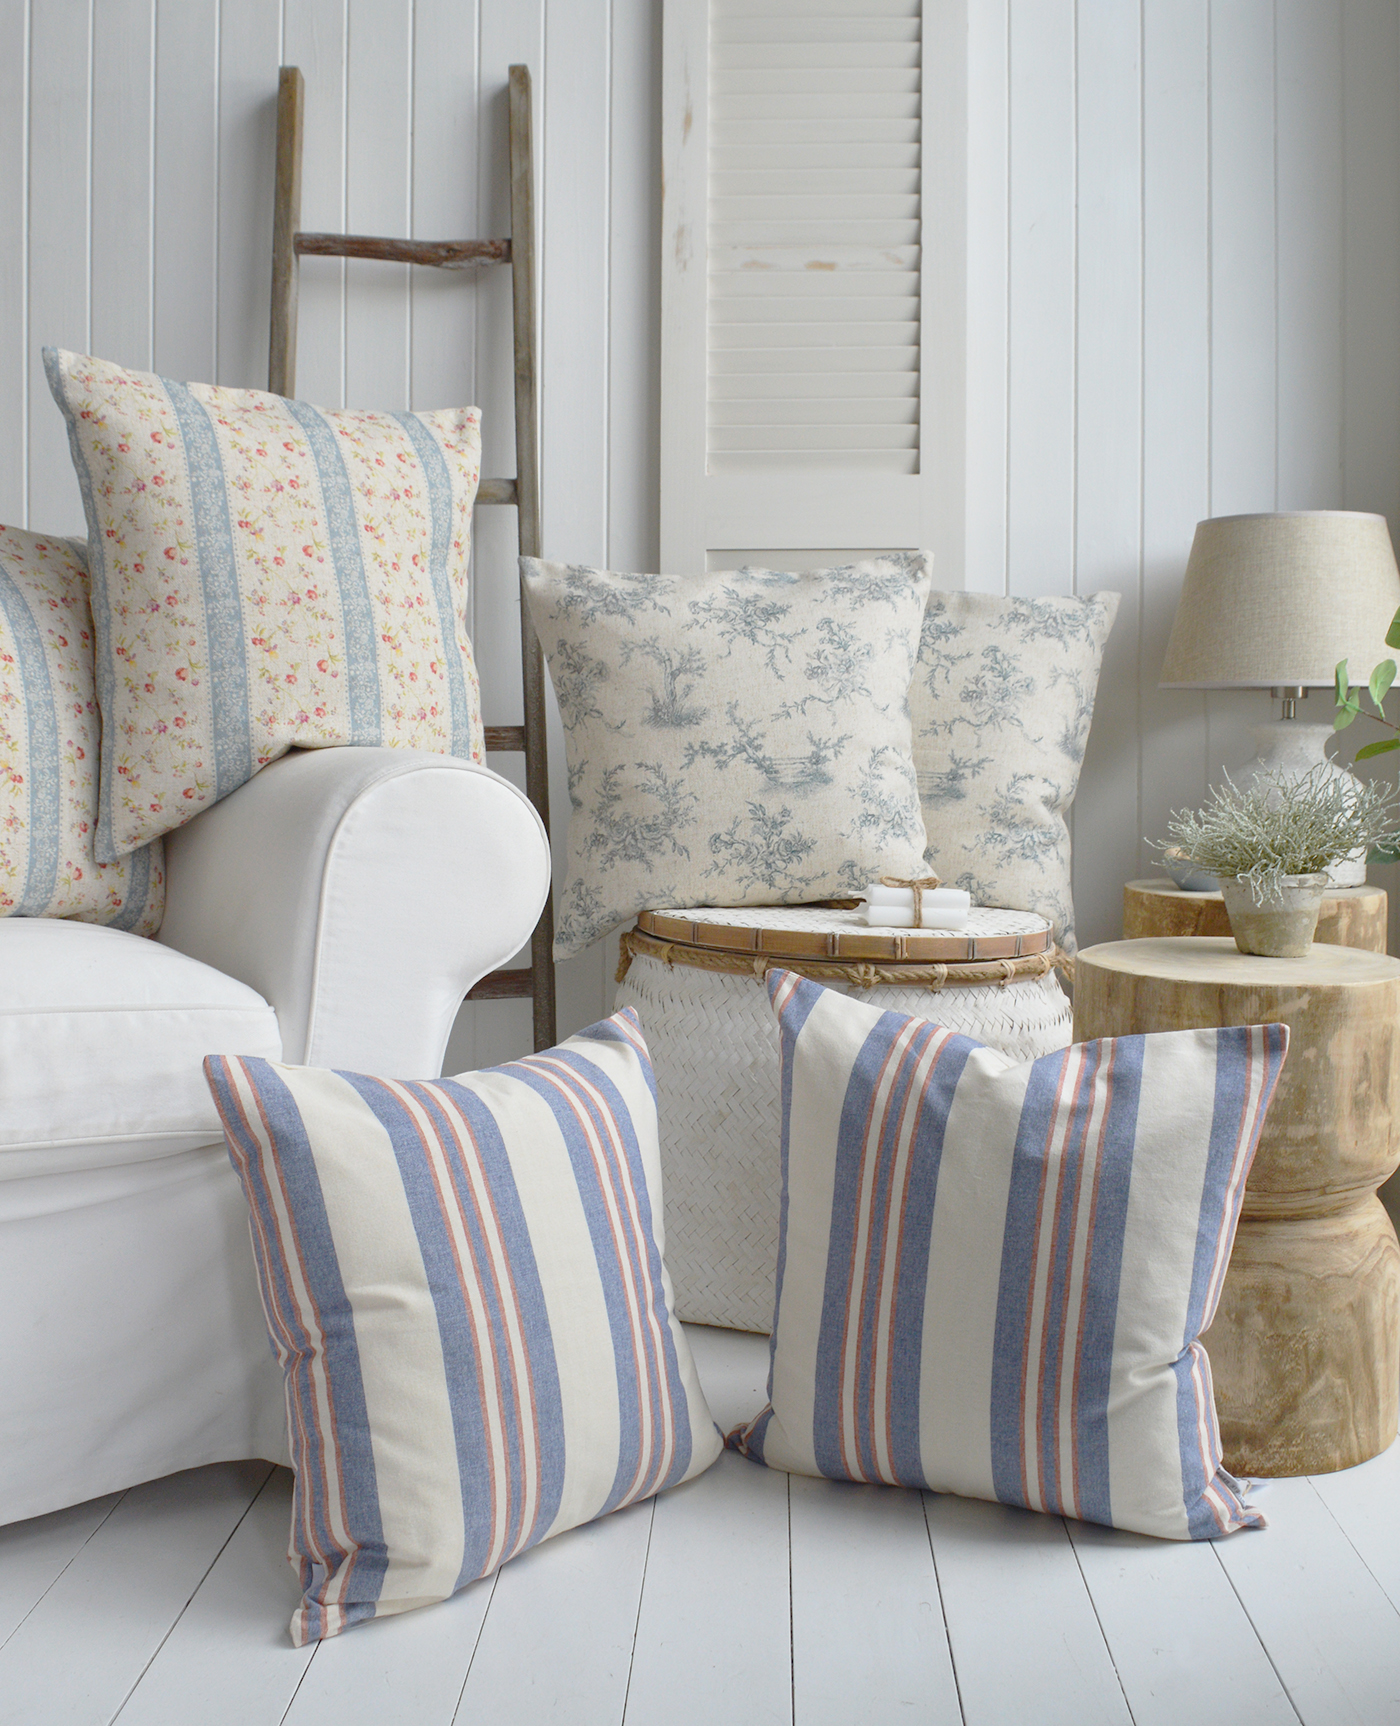 New England style luxury cushions in stripes and florals, perfect to complement our range of coastal, modern farmhouse and country furniture